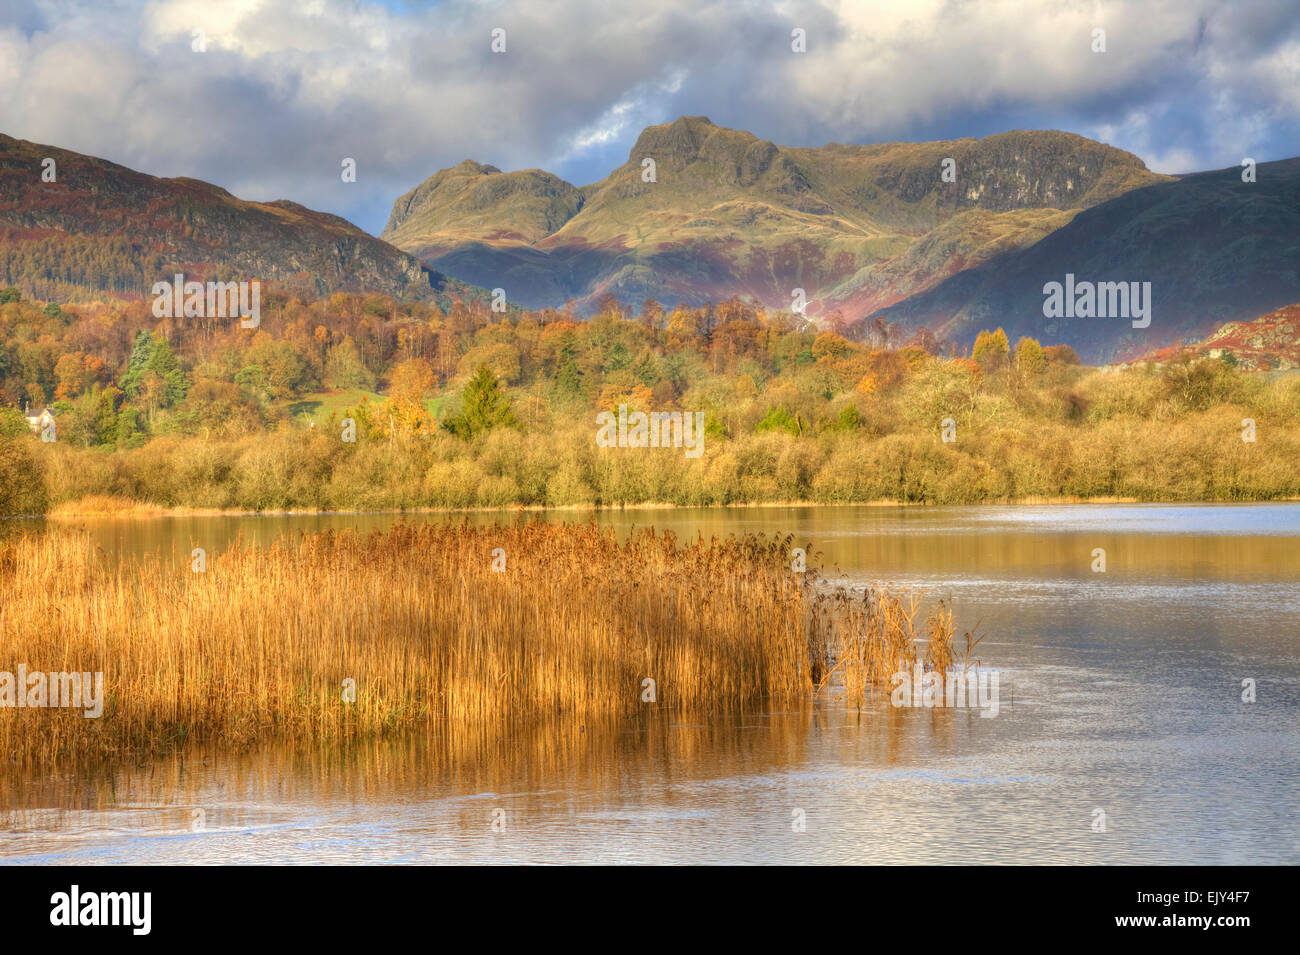 Elterwater con The Langdale Pikes in distanza. Foto Stock